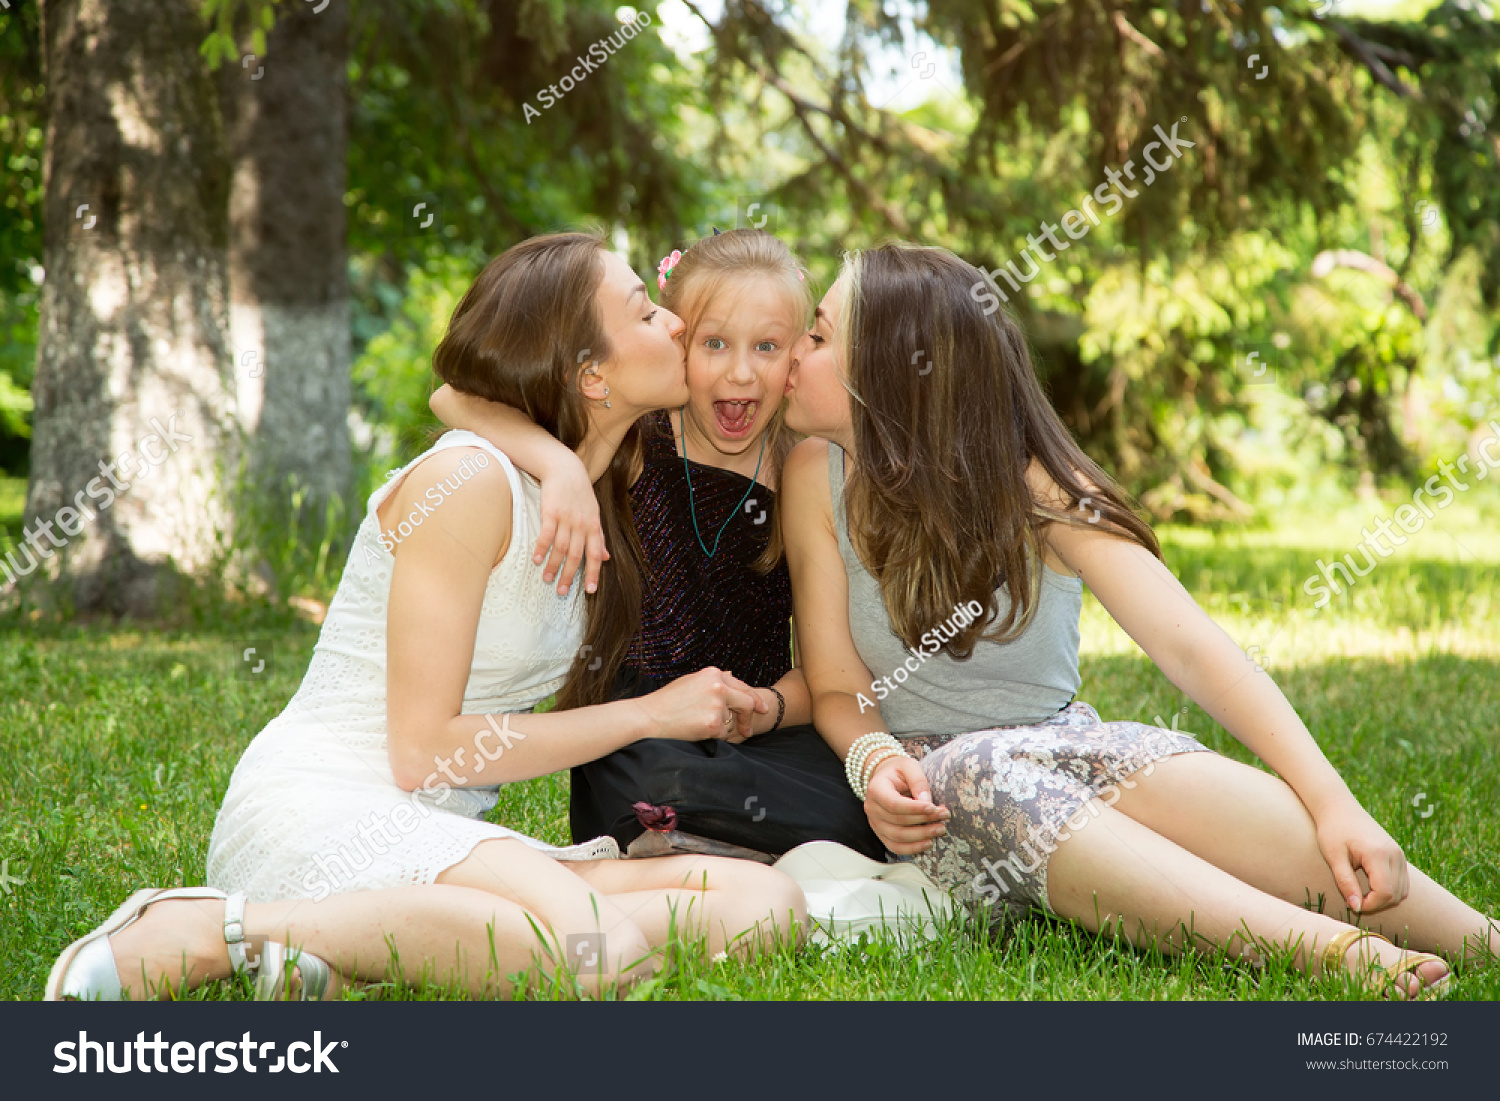 Three Girls Kissing Each Other